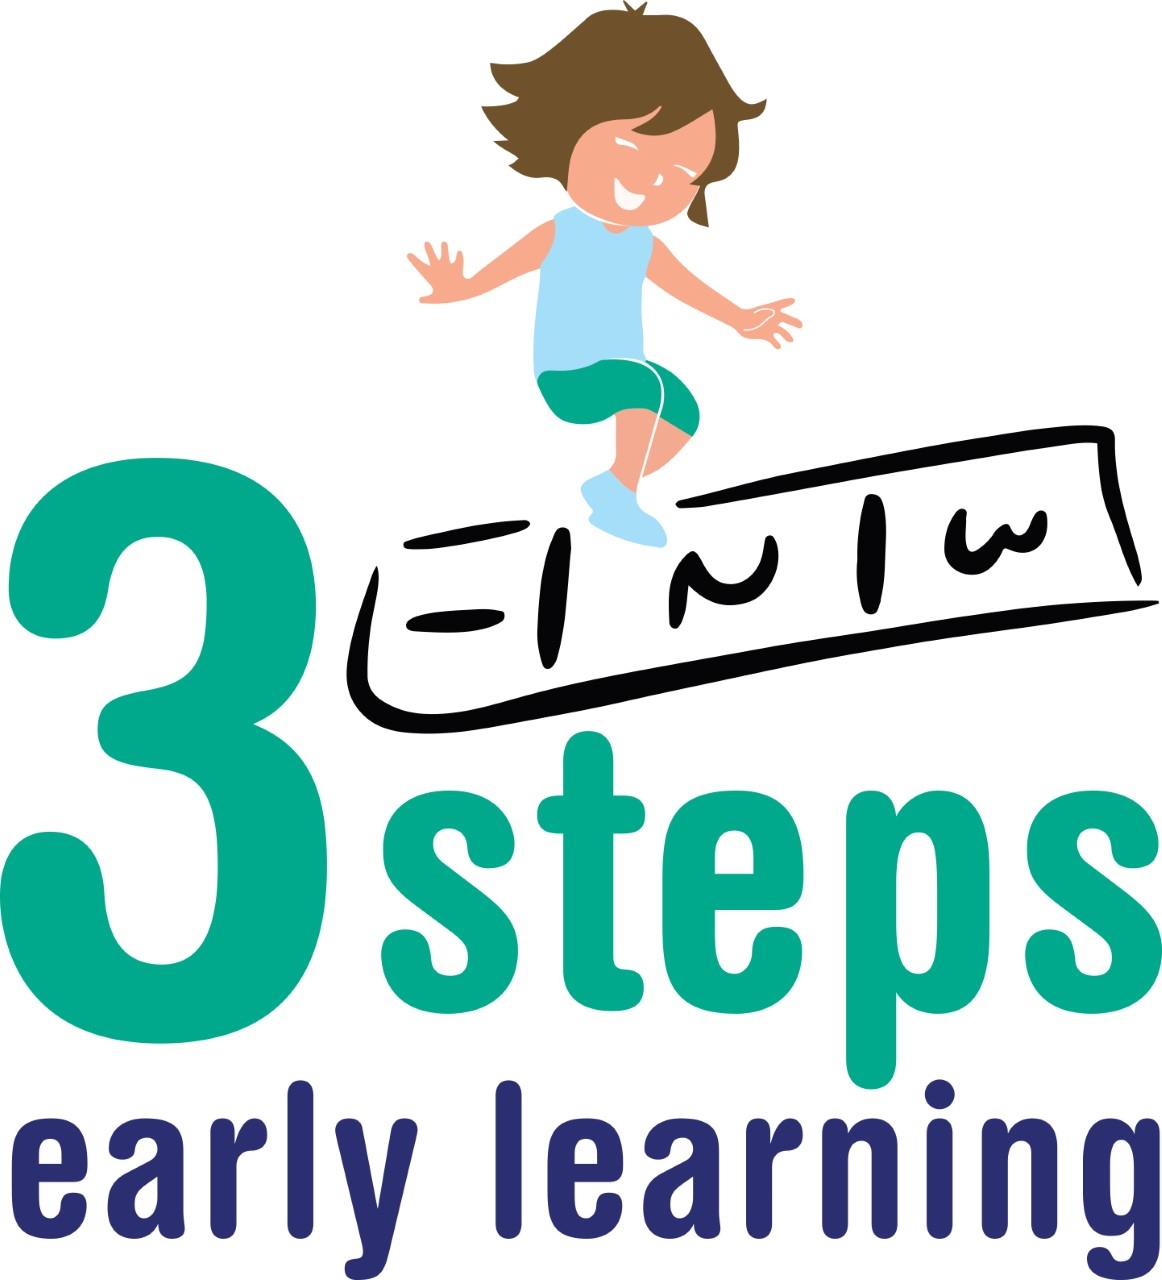 3 Steps Early Learning Centre